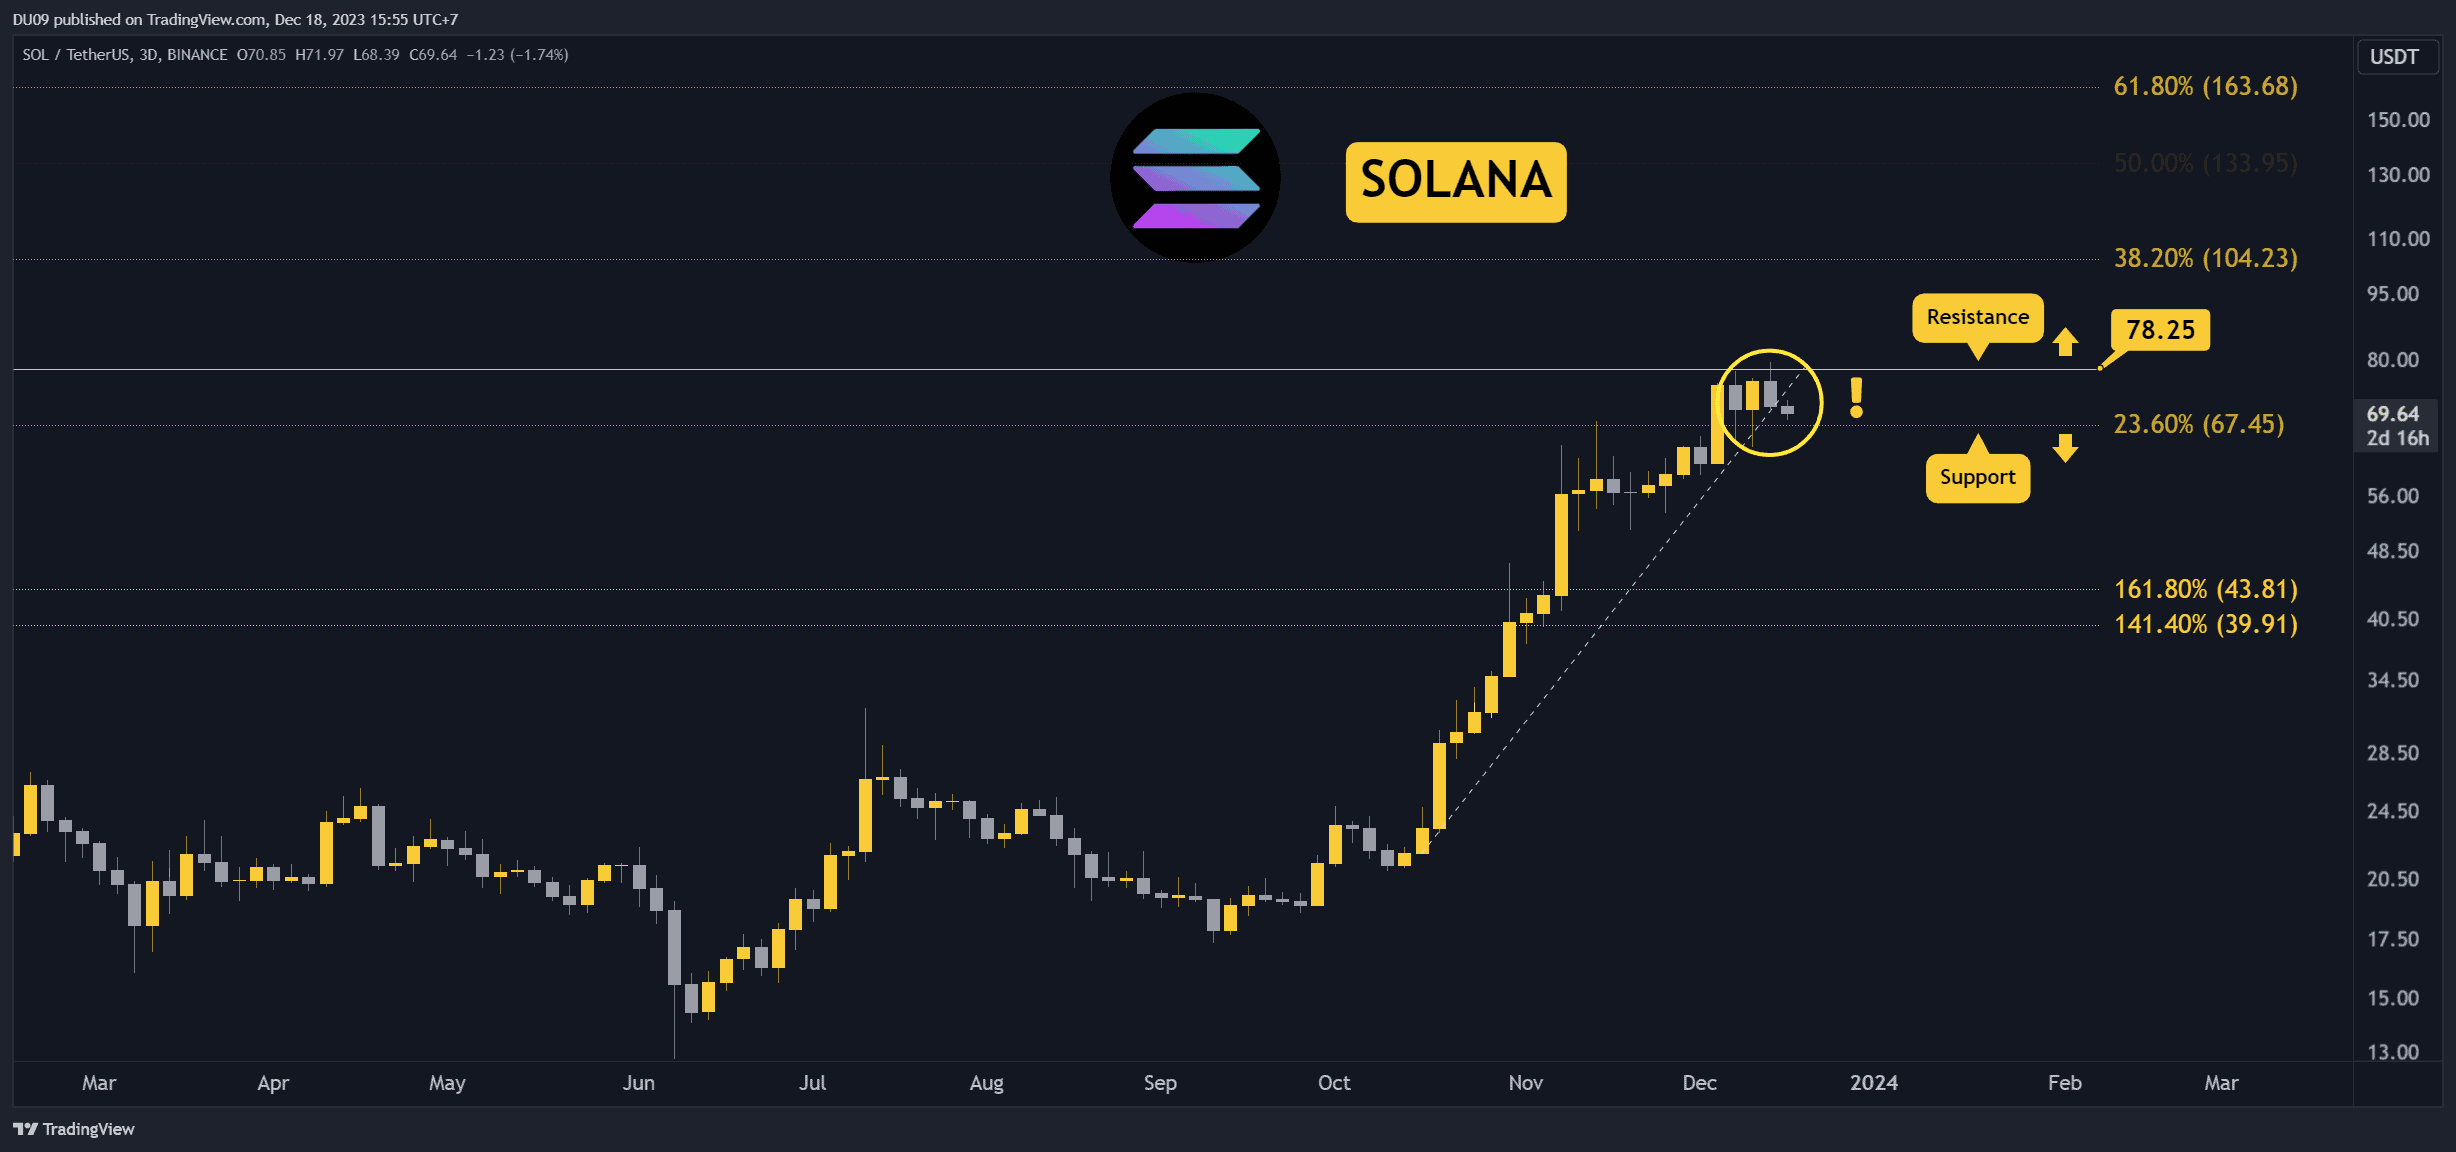 Will-sol-resume-its-rally-or-is-a-deeper-correction-looming?-(solana-price-analysis)